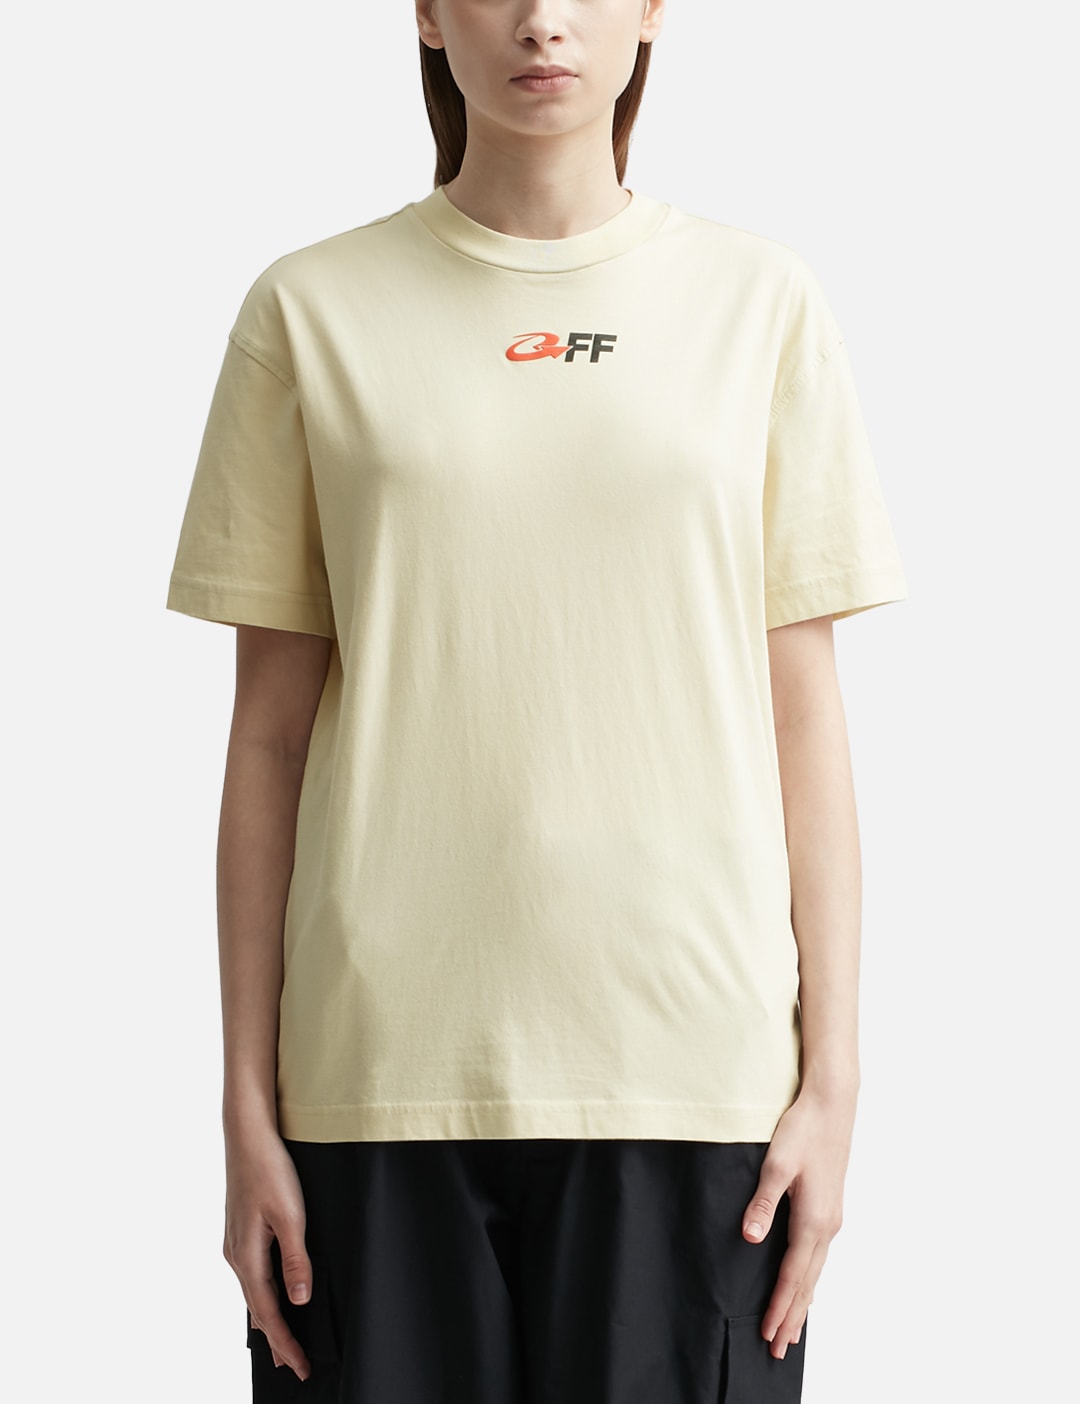 The Opposite Casual T-shirt Placeholder Image